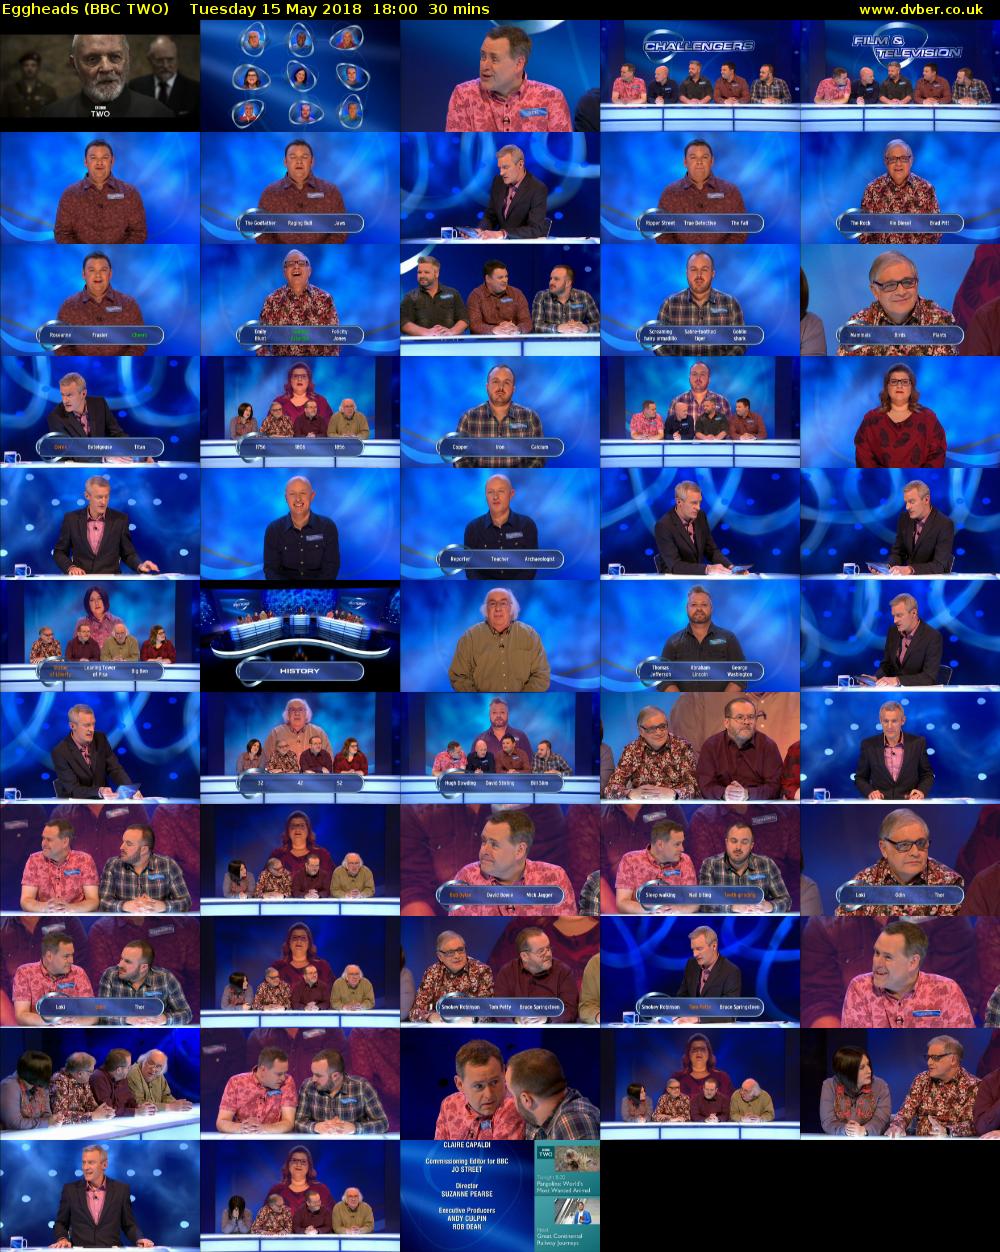 Eggheads (BBC TWO) Tuesday 15 May 2018 18:00 - 18:30